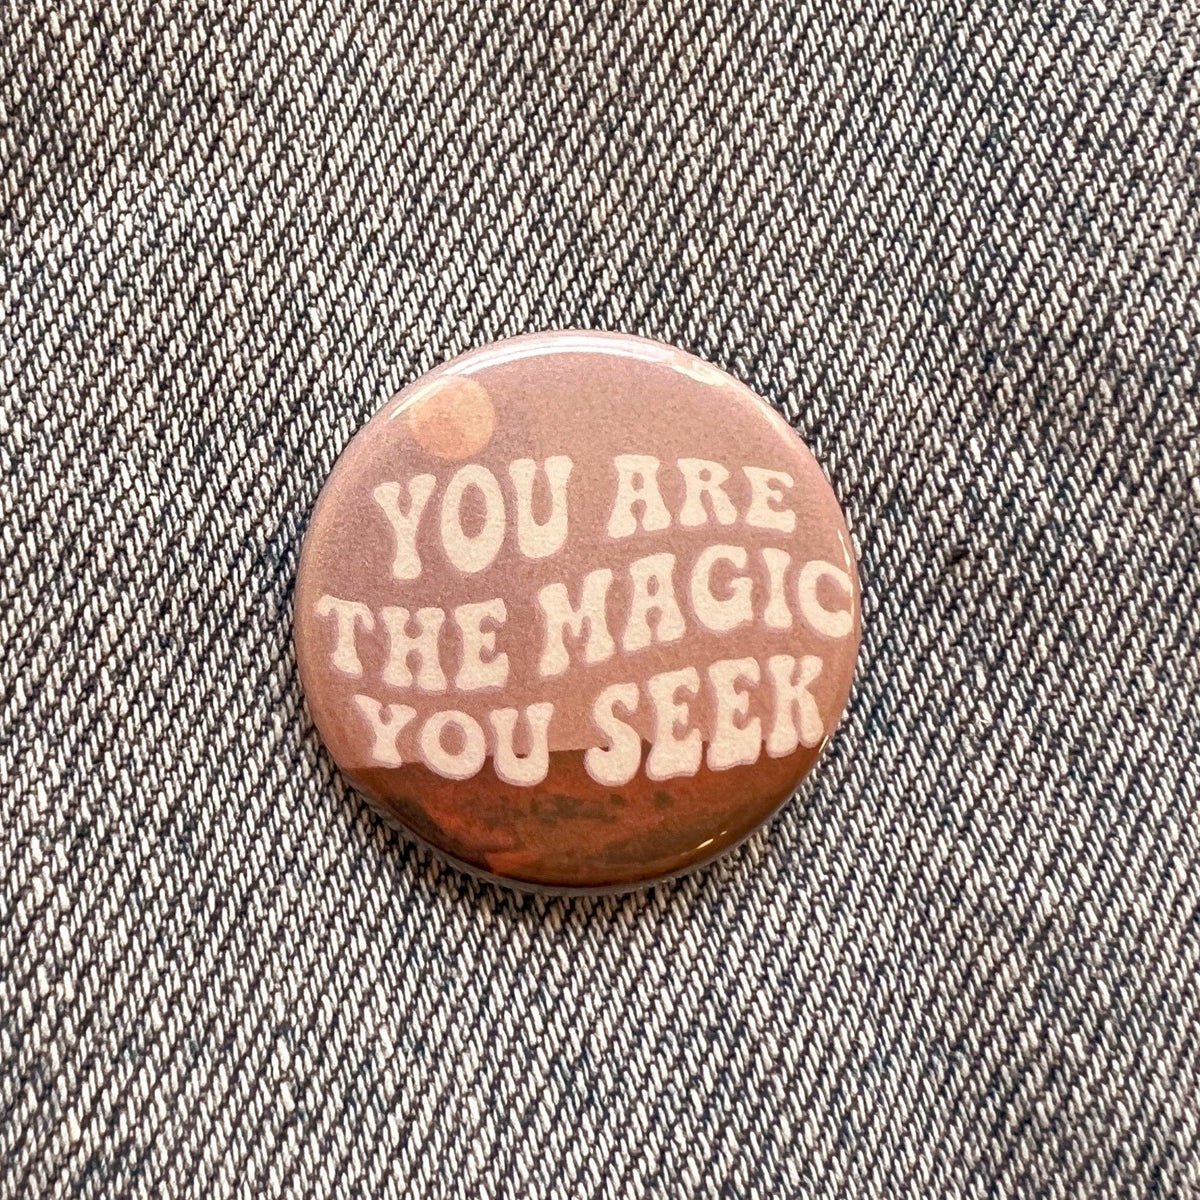 Positivity Button Pins: Don't Overthink